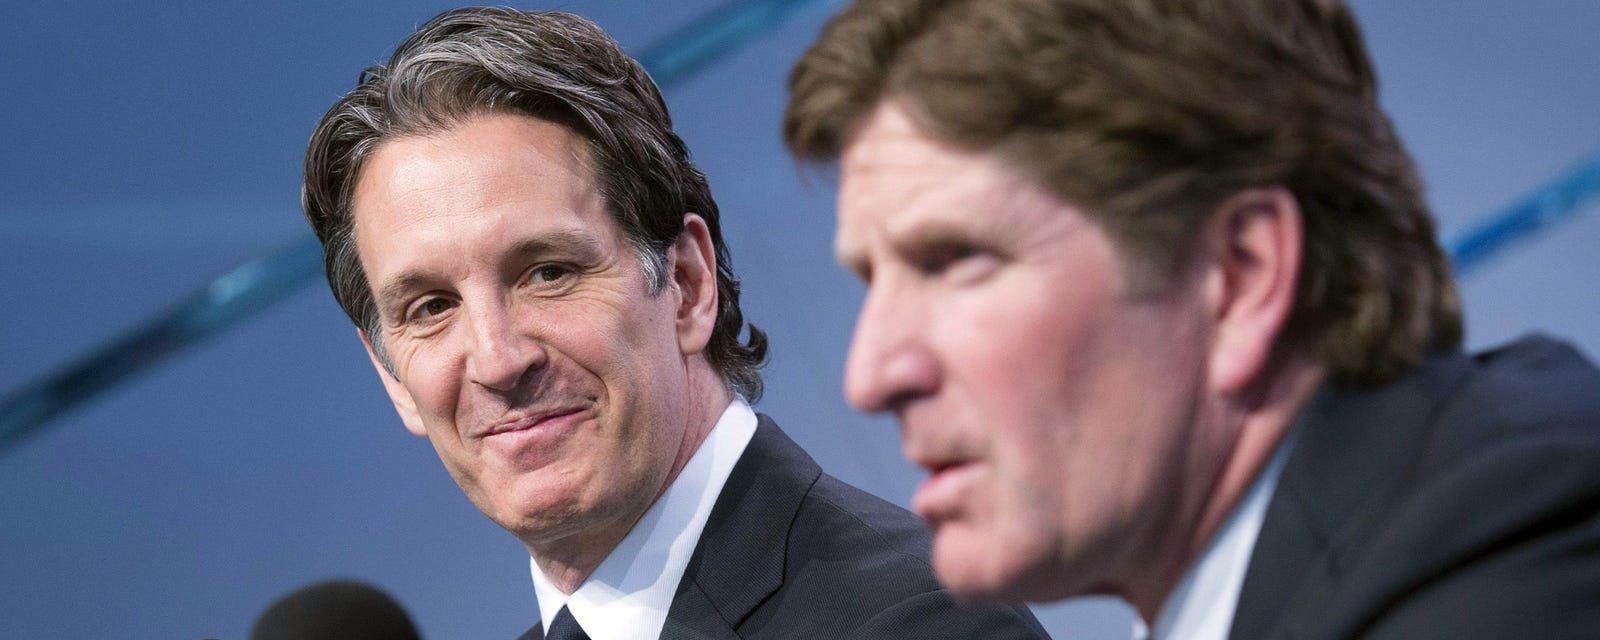 Leafs’ Shanahan comments on NHL teams looking to speak with Babcock about job 